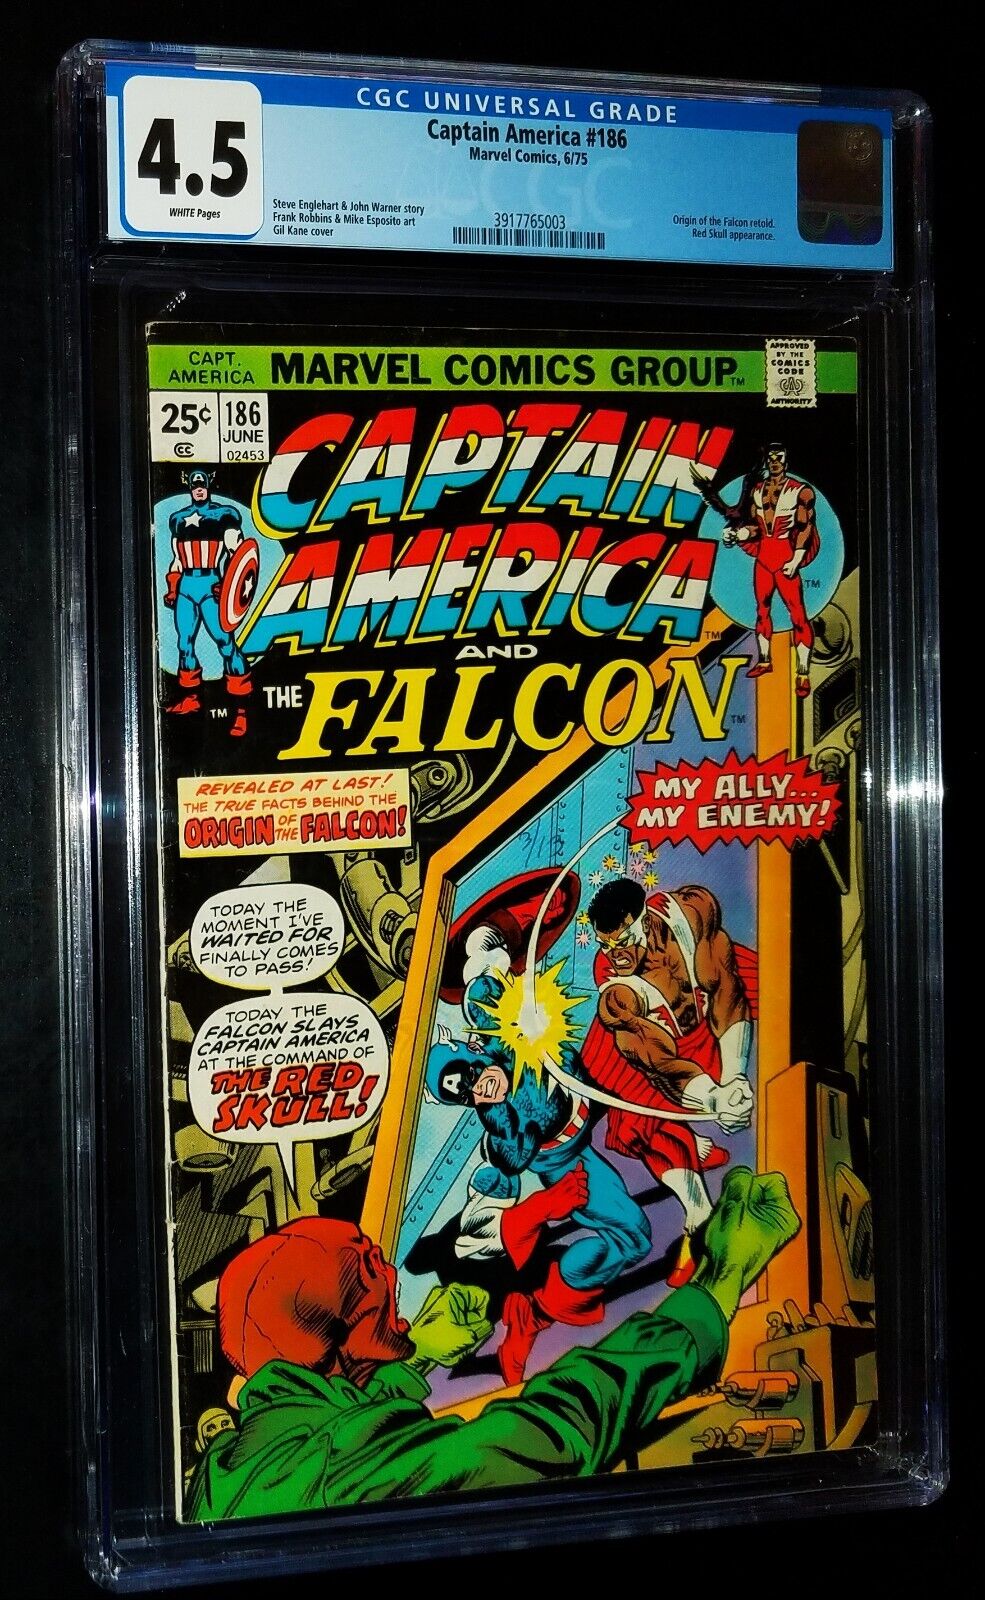 CGC CAPTAIN AMERICA #186 1975 Marvel Comics CGC 4.5 VG+ Key Issue/White Pages